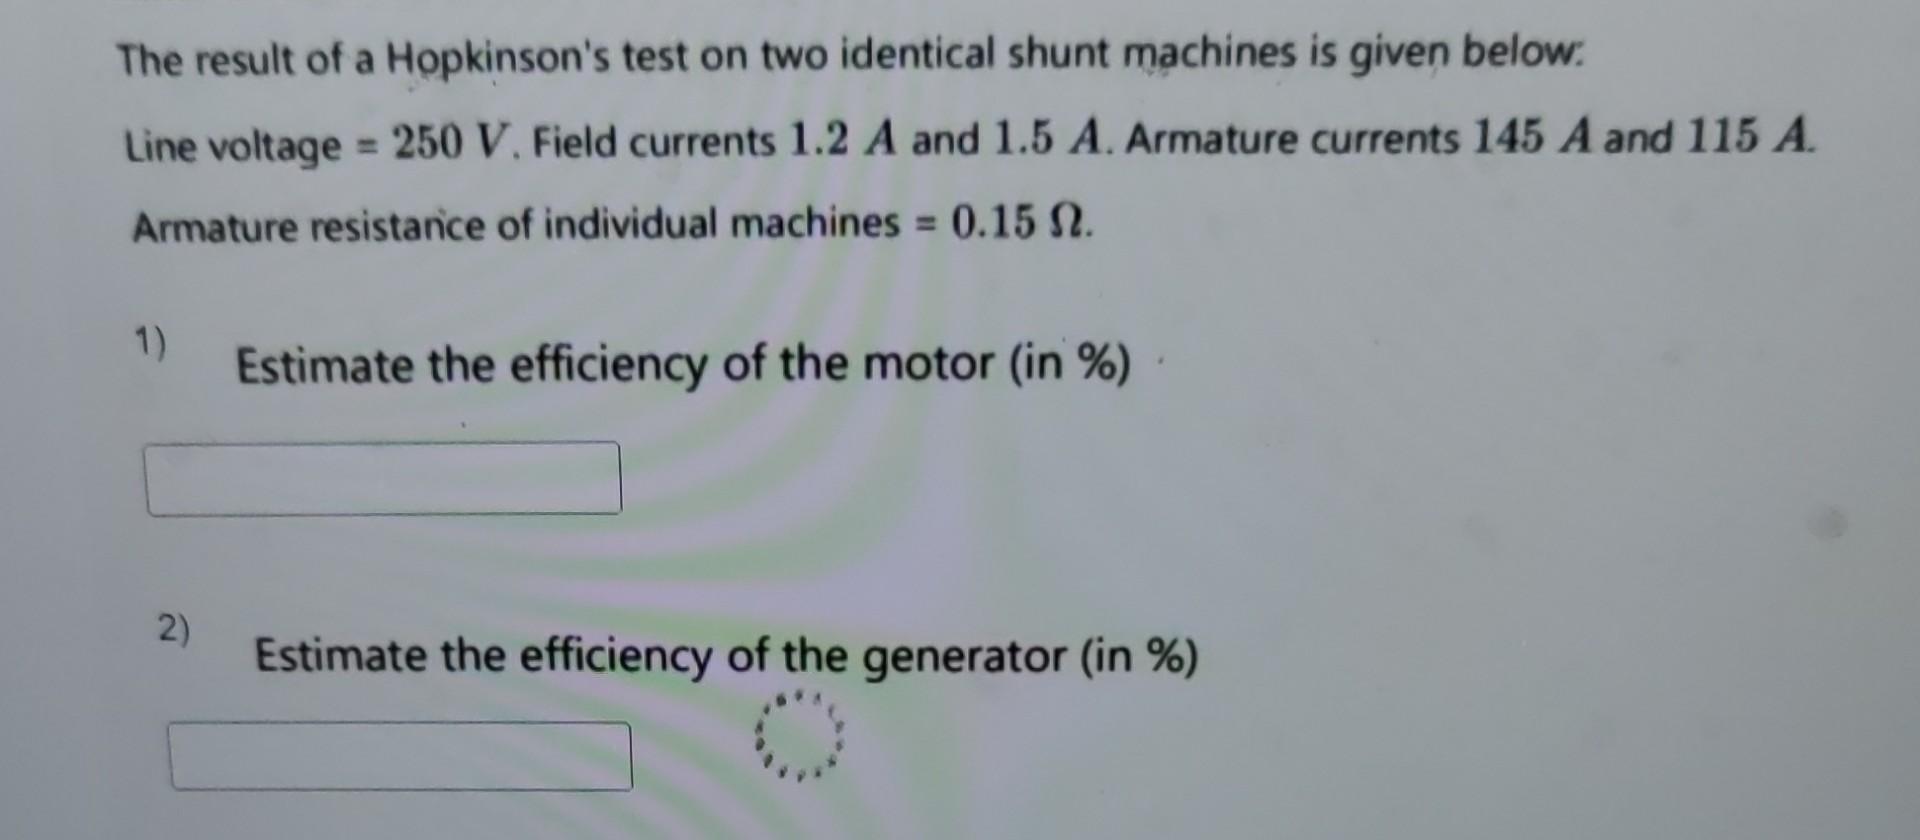 The result of a Hopkinson's test on two identical shunt machines is given below. Line voltage = 250 V. Field